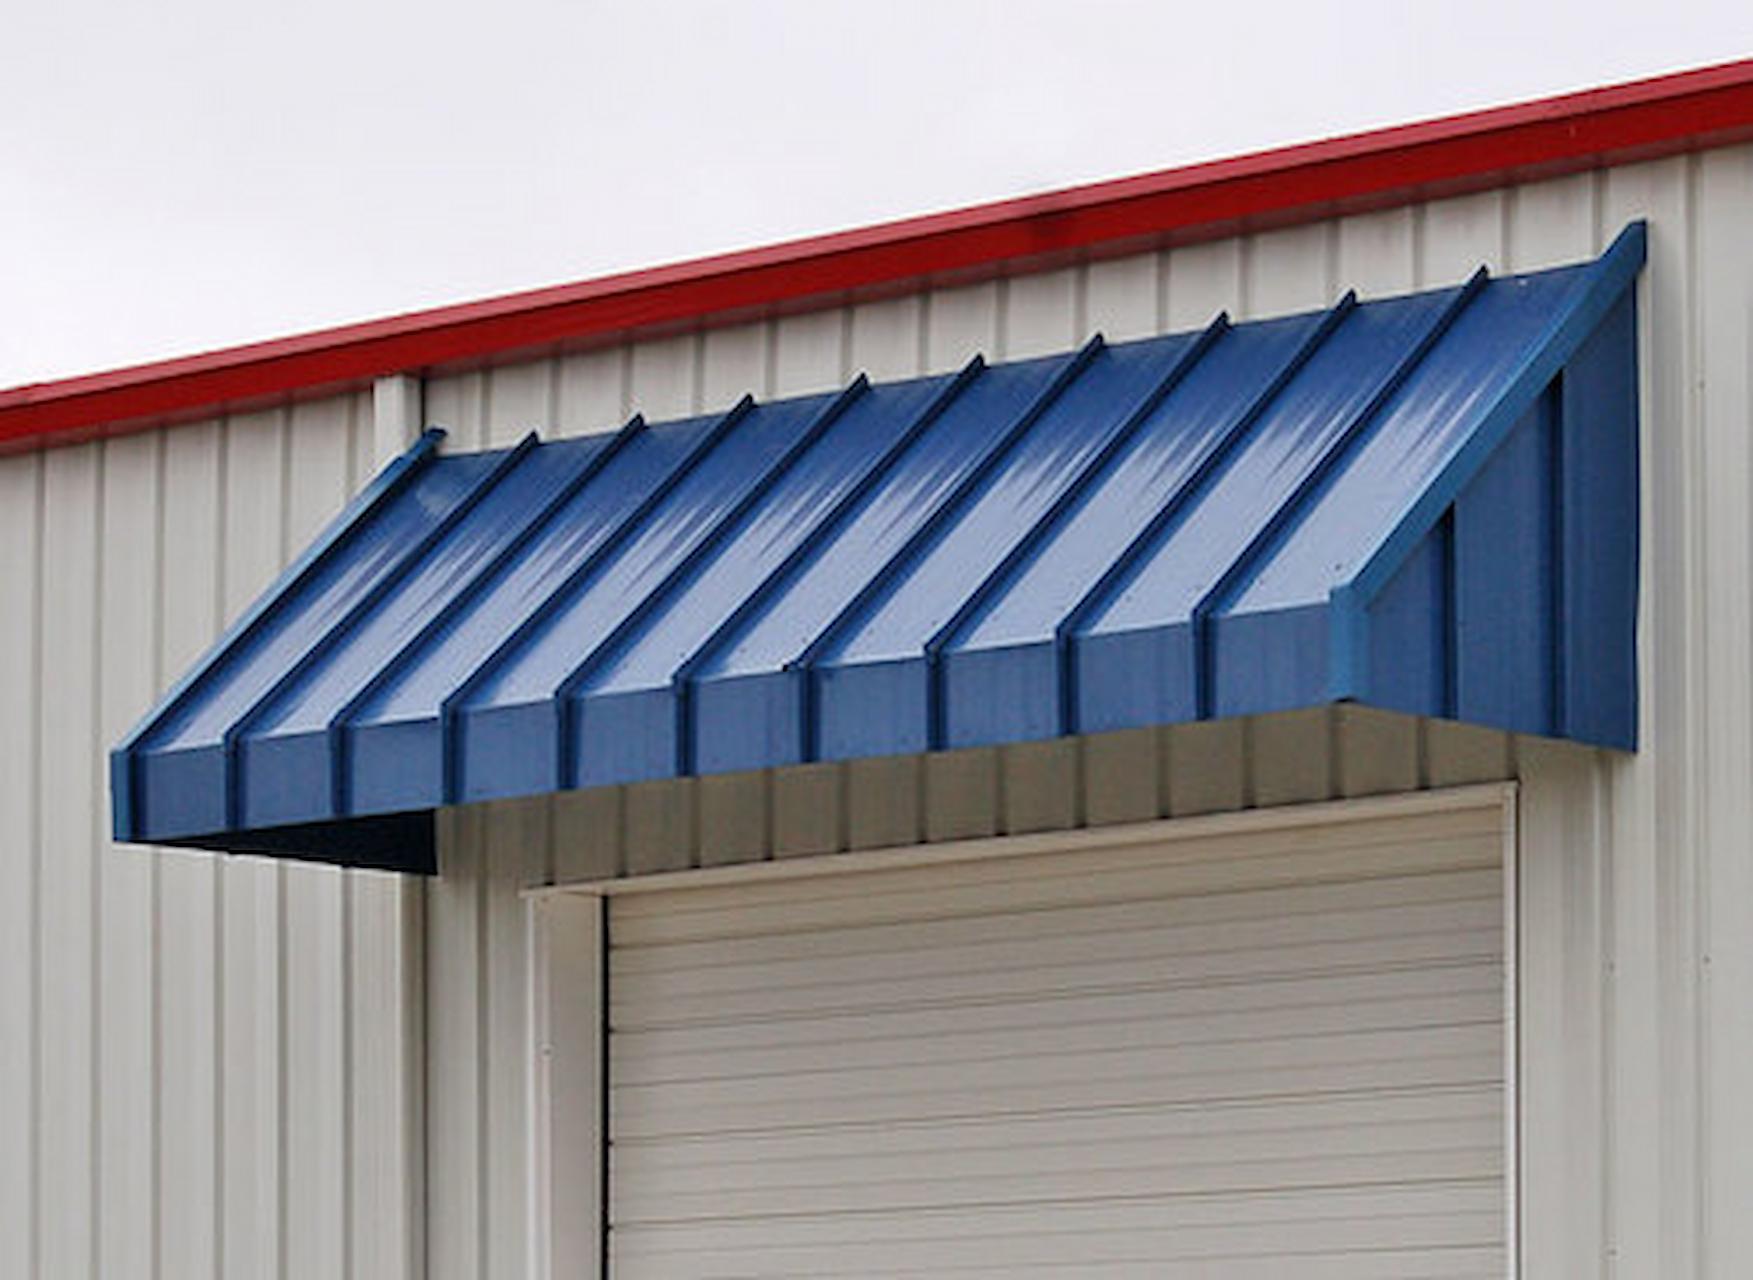 What Are Commercial Awnings